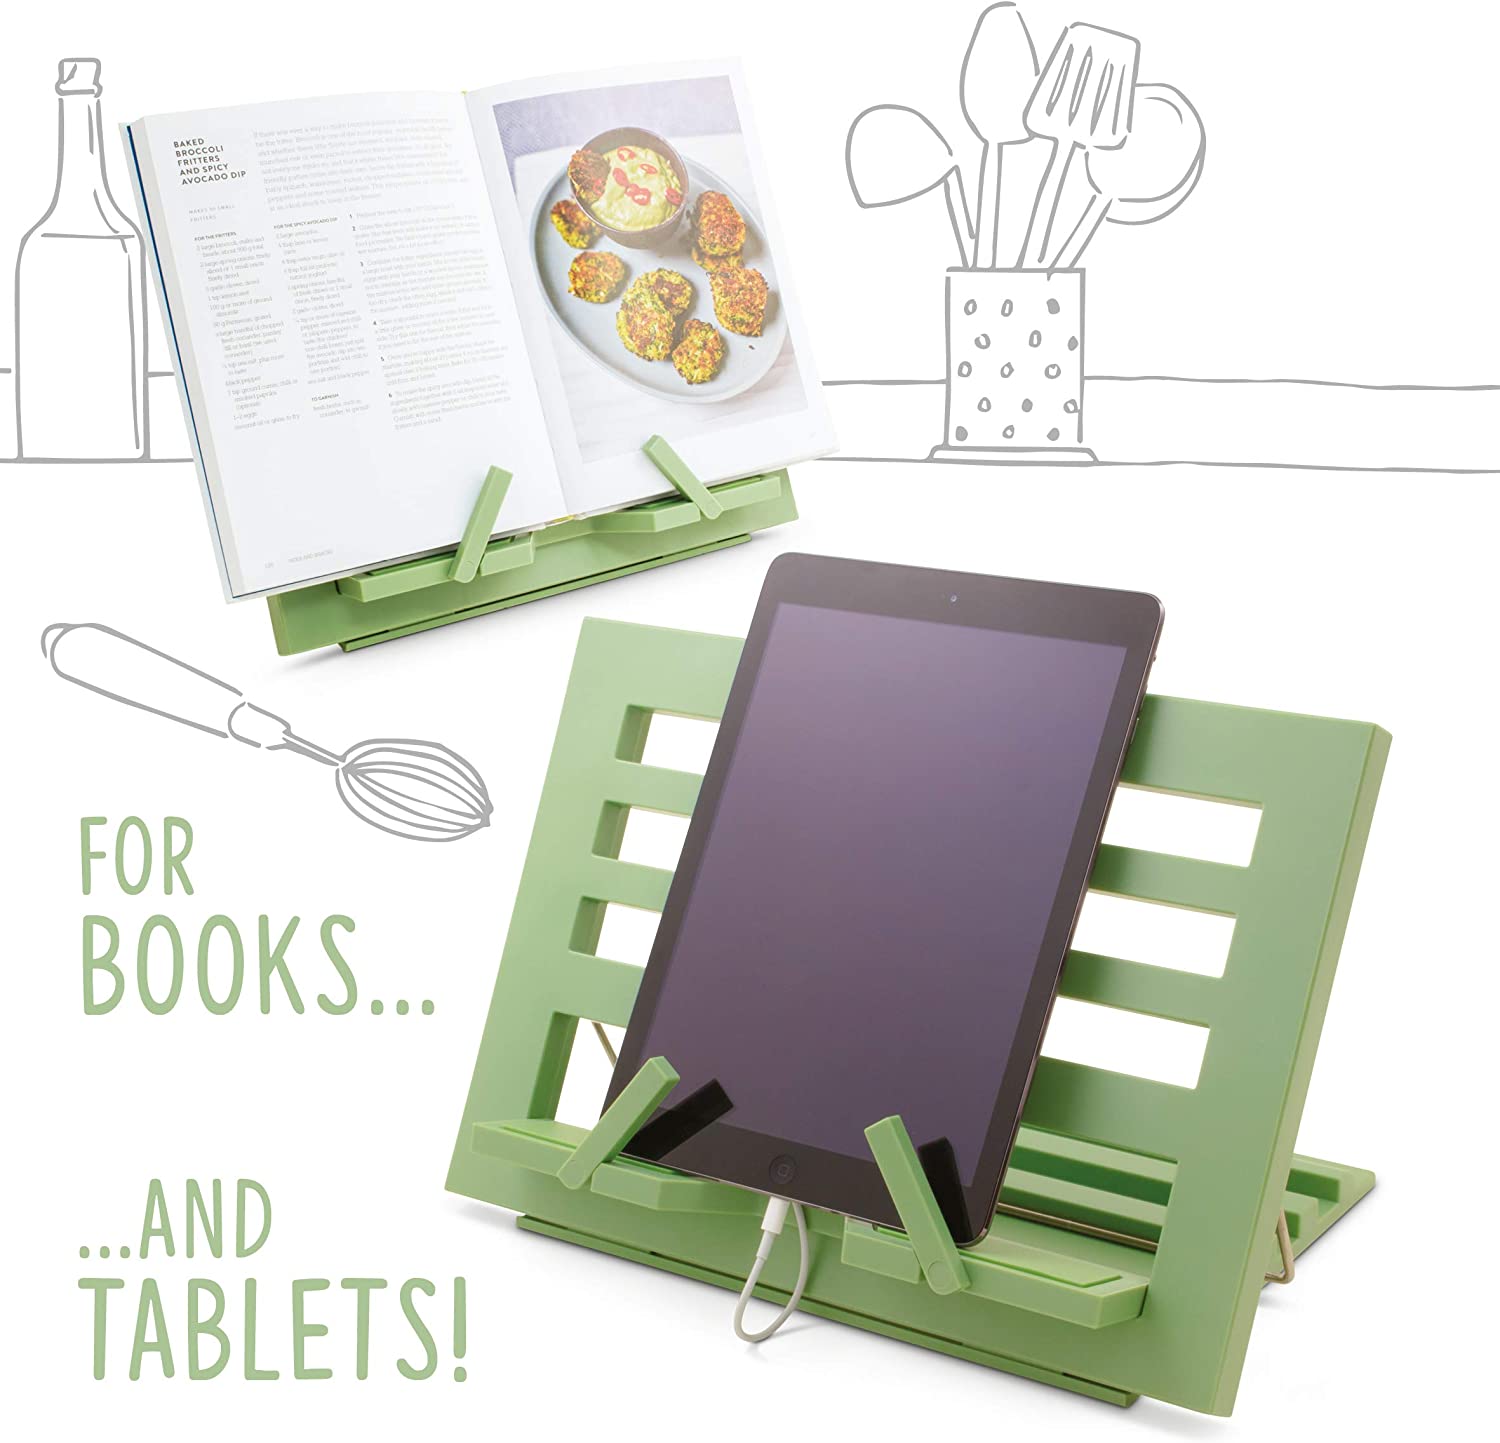 THE NEW BRILLIANT READING REST - SAGE GREEN